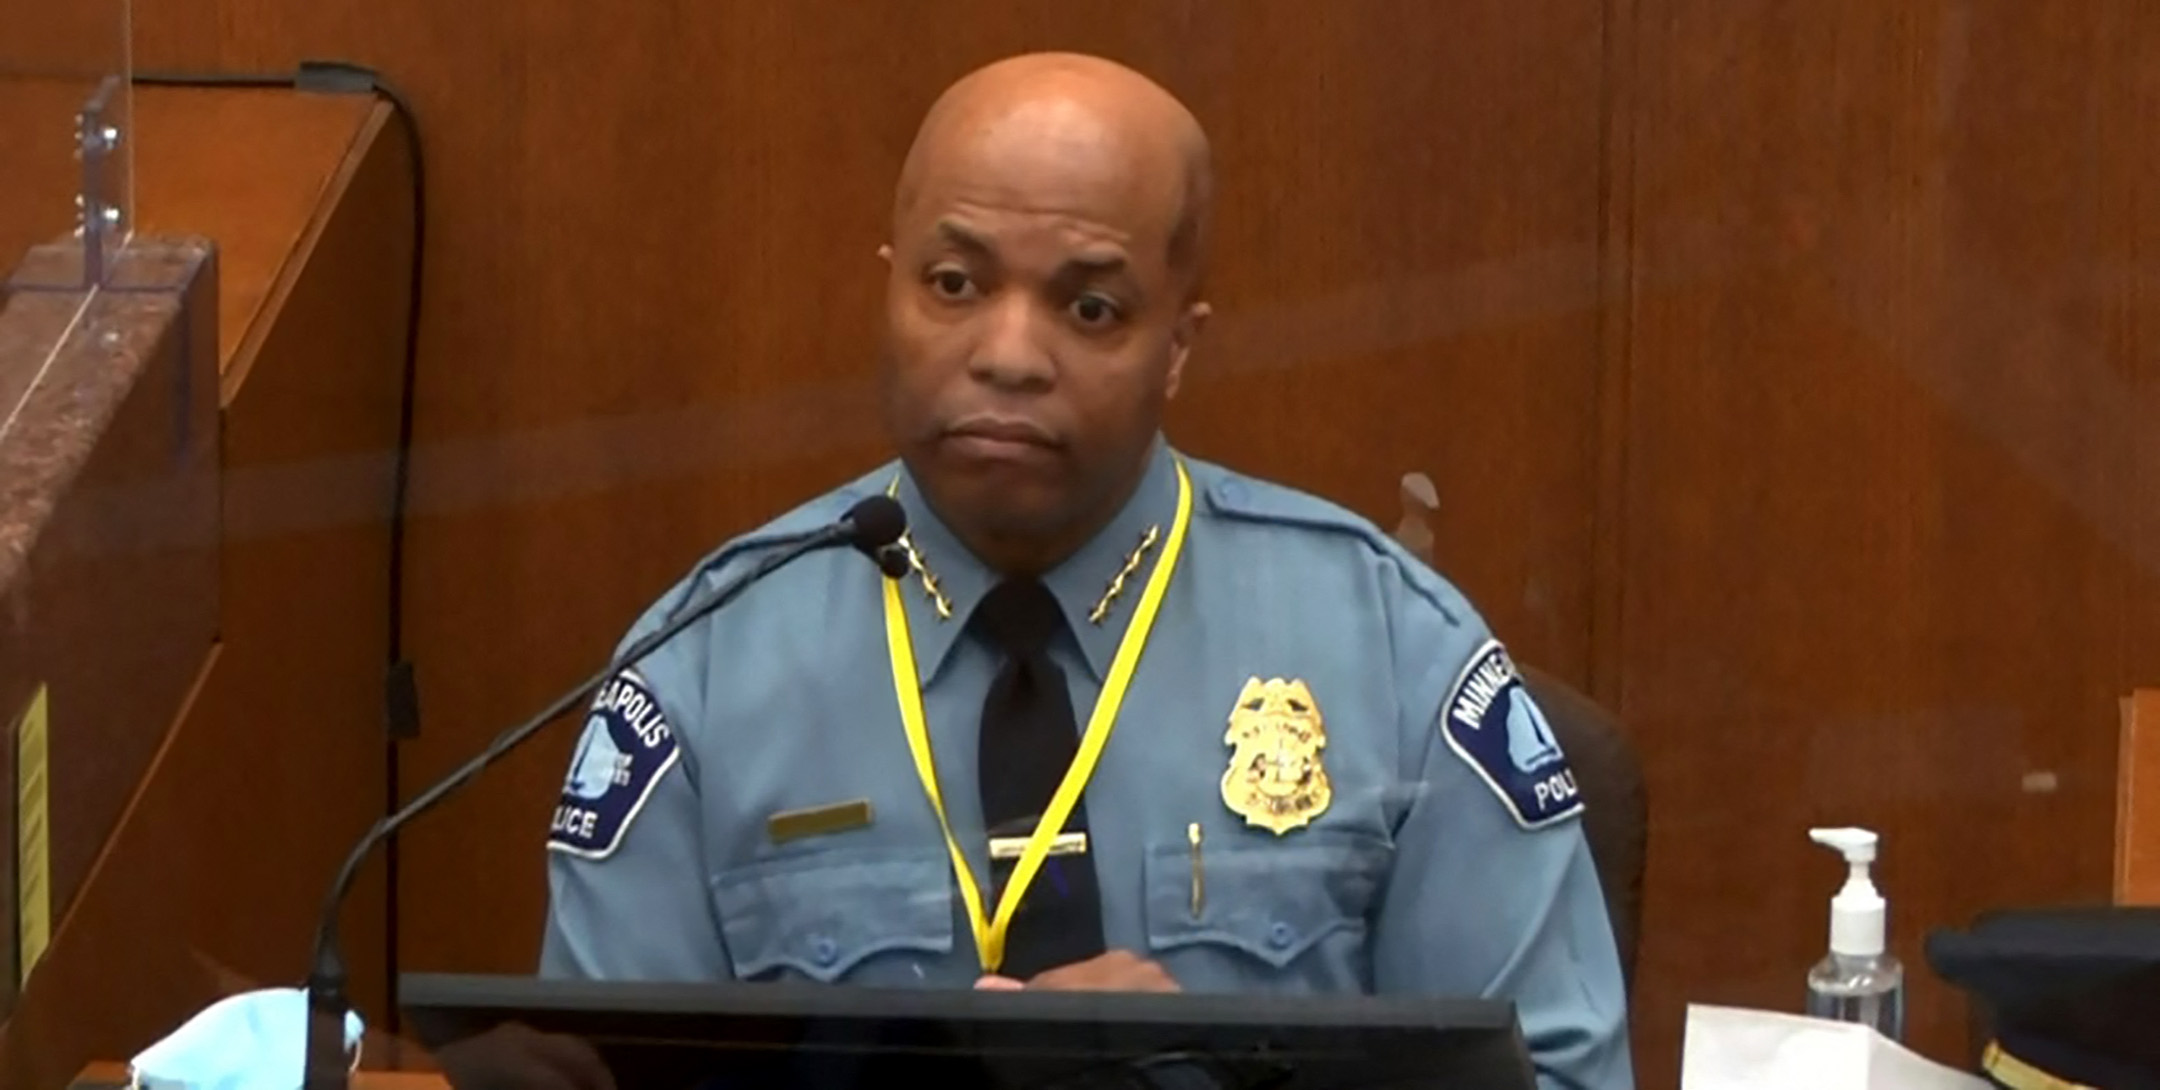 PHOTO: Minneapolis Police Chief Medaria Arradondo testifying during the trial of former police officer Derek Chauvin charged in the death of George Floyd in Minneapolis, Minnesota, March 29, 2021.